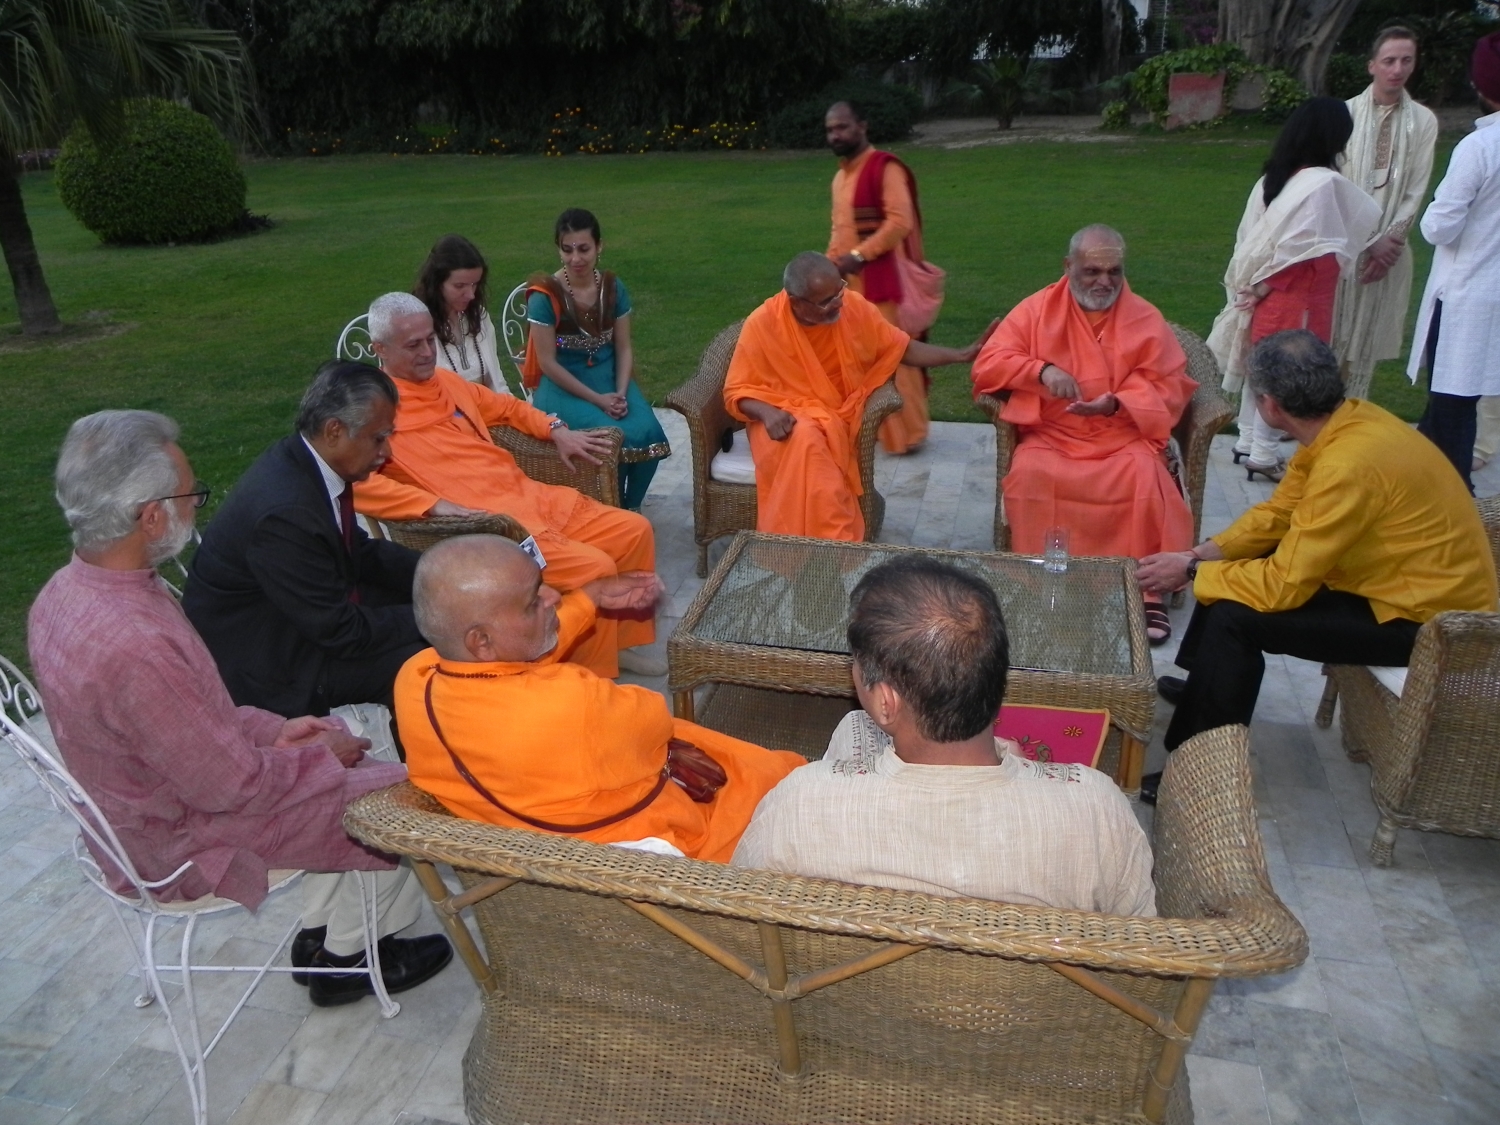 Reception of the Great Yoga Masters of India at the Embassy of Portugal - Dillí, India - 2011, March